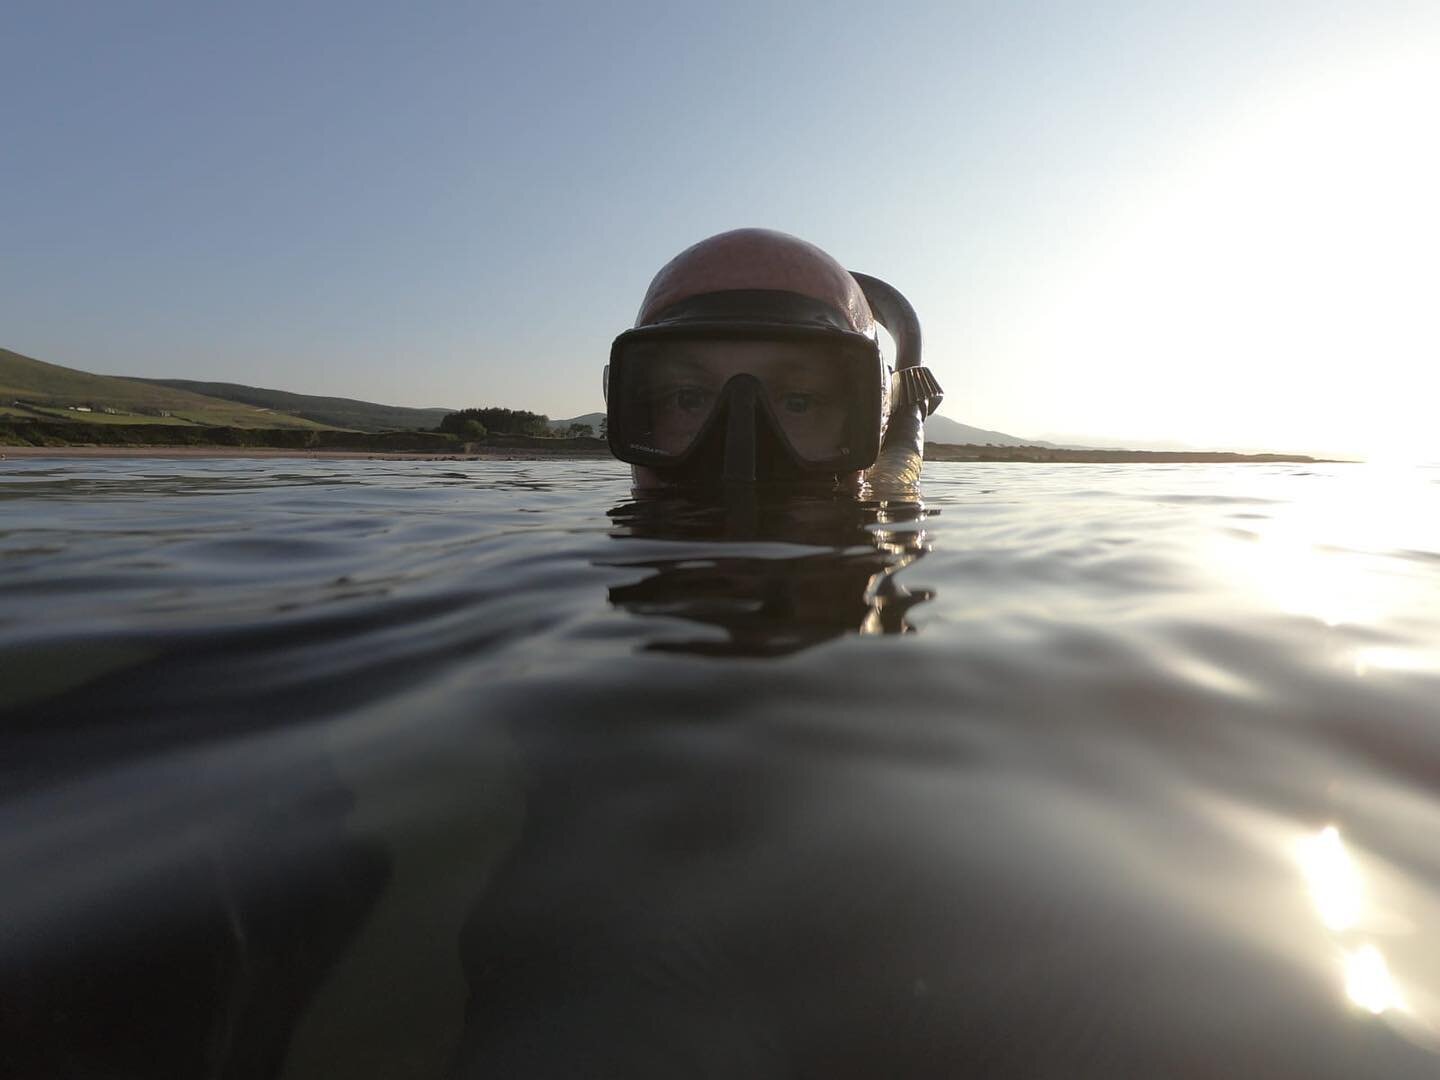 The only place for adventure therapy is the calm and cooling sea 🌊 during this super spell of great weather in Ireland 🇮🇪 #adventuretherapy #snorkeling #bluespace #irishsummer #heatwave